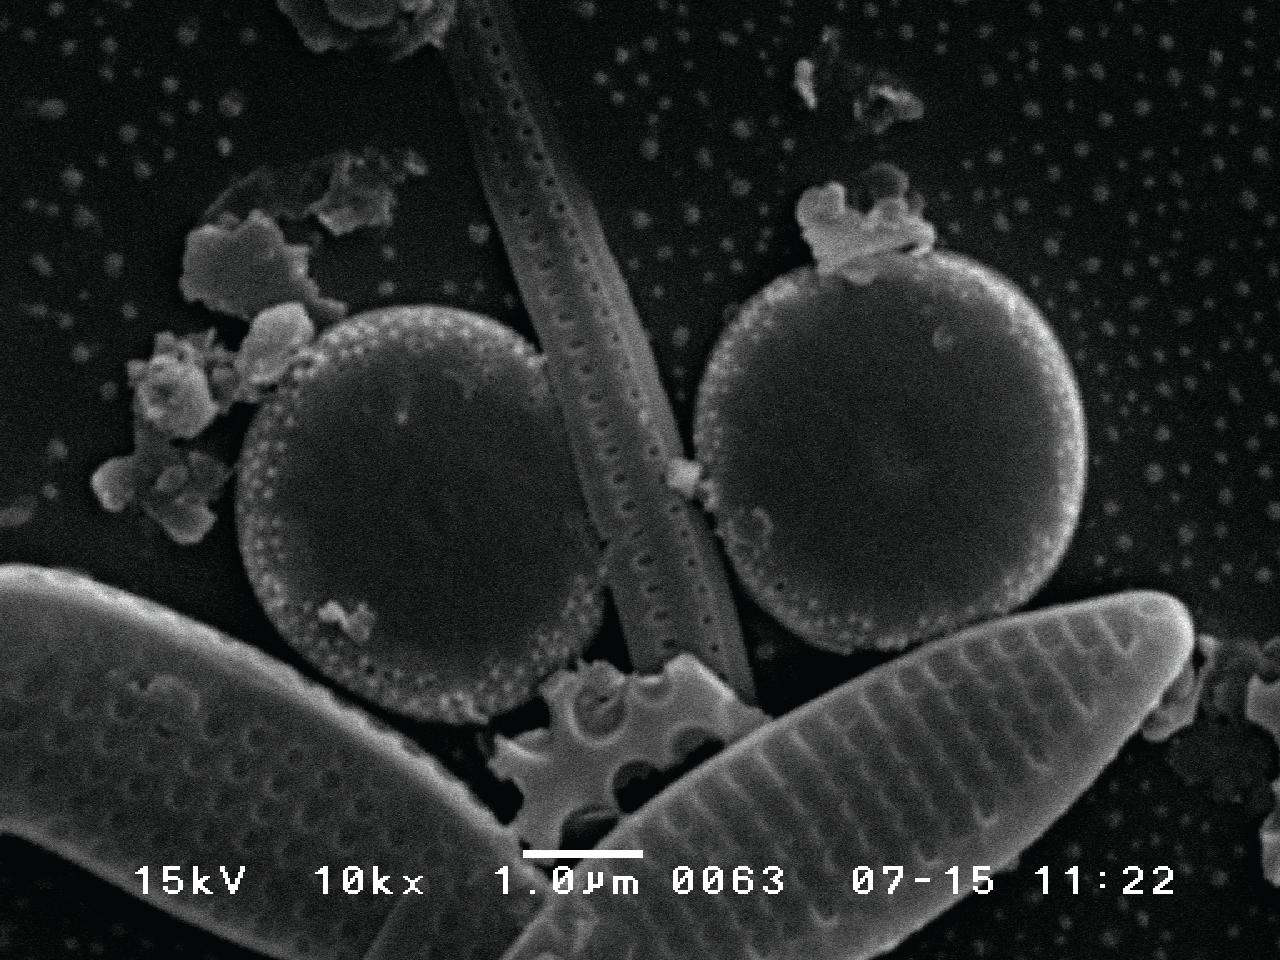 Cyclotella atomus var. marina SEM photos; showing various morphology of external valve. Each scale is shown in each photo.